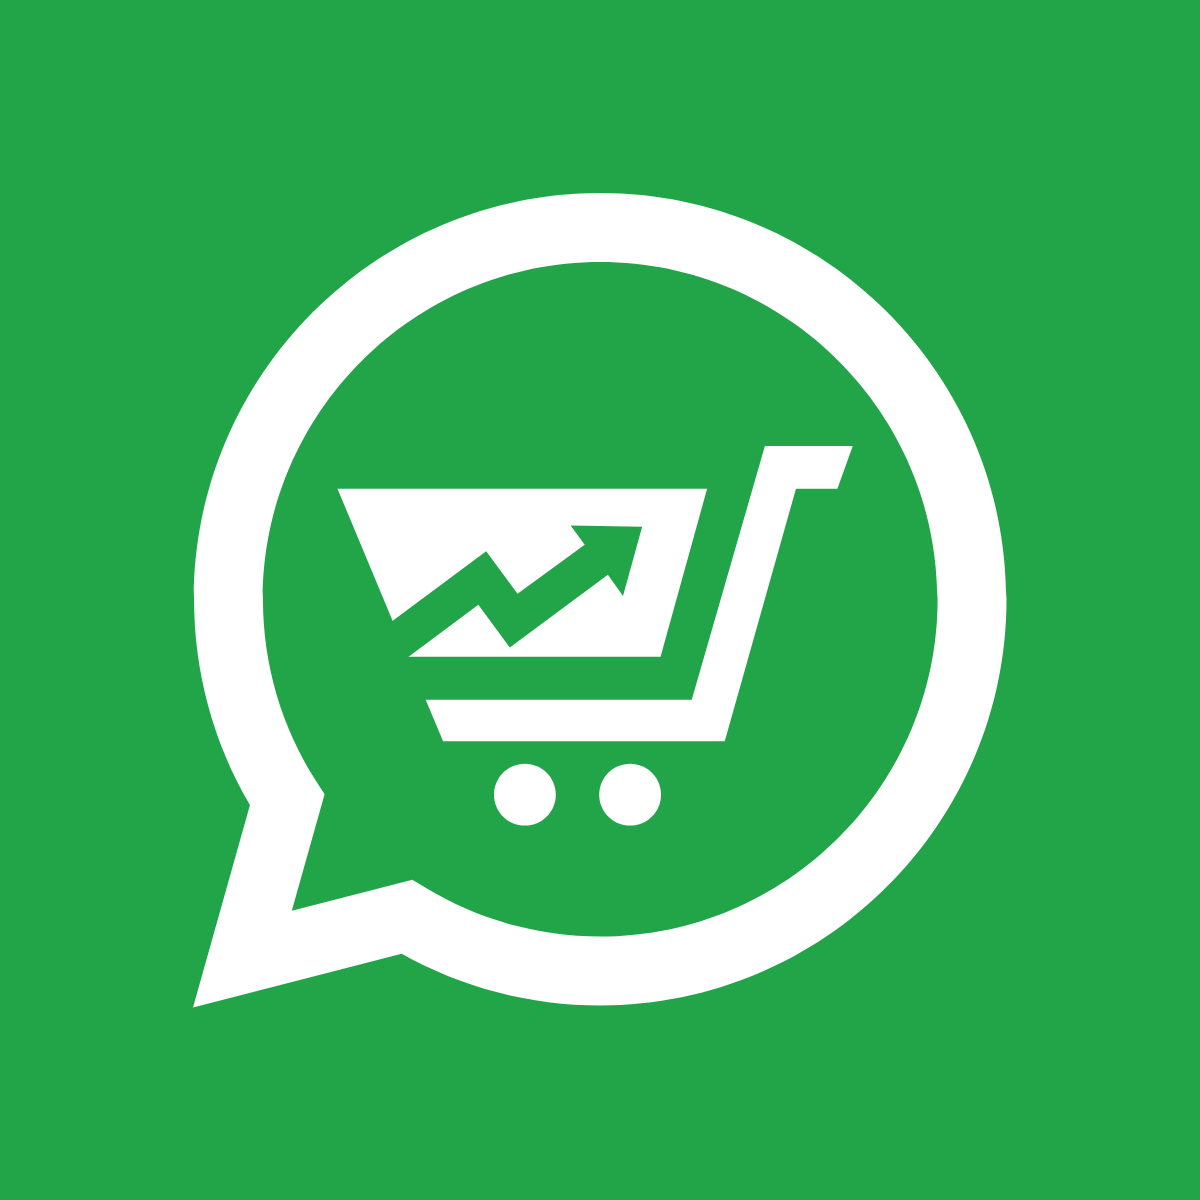 Hire Shopify Experts to integrate Progressive Discount Banner app into a Shopify store